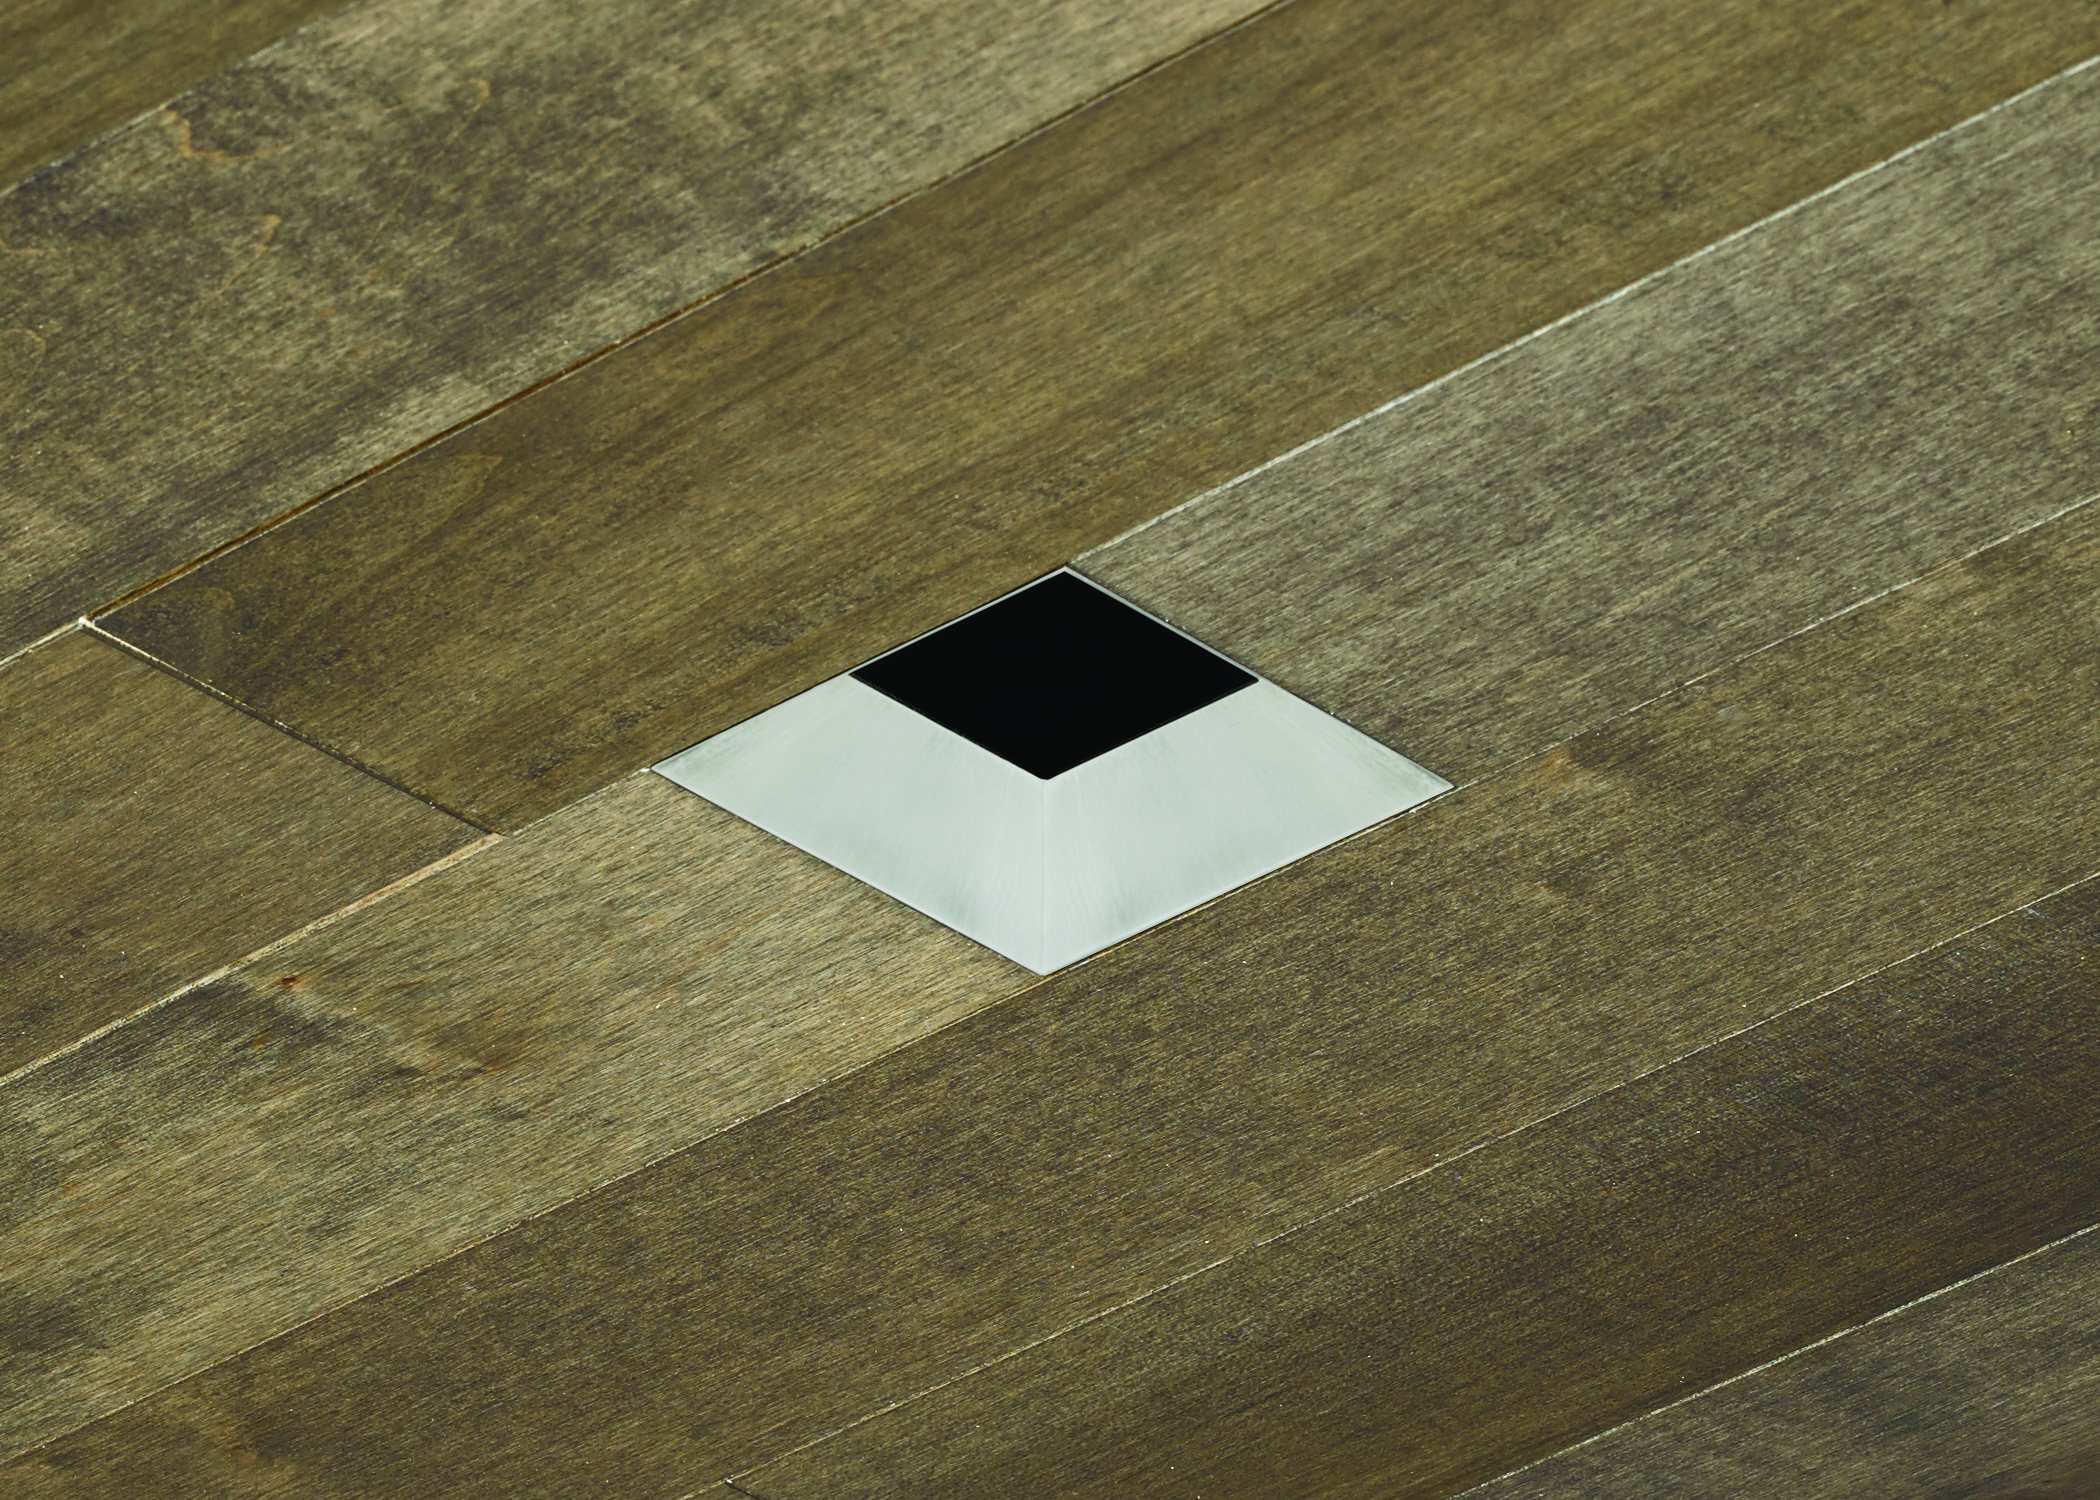 Tech Lighting has introduced ELEMENT 3” recessed downlights for wood ceiling solutions which will offer truly flangeless installation without unsightly transitions or hardware.